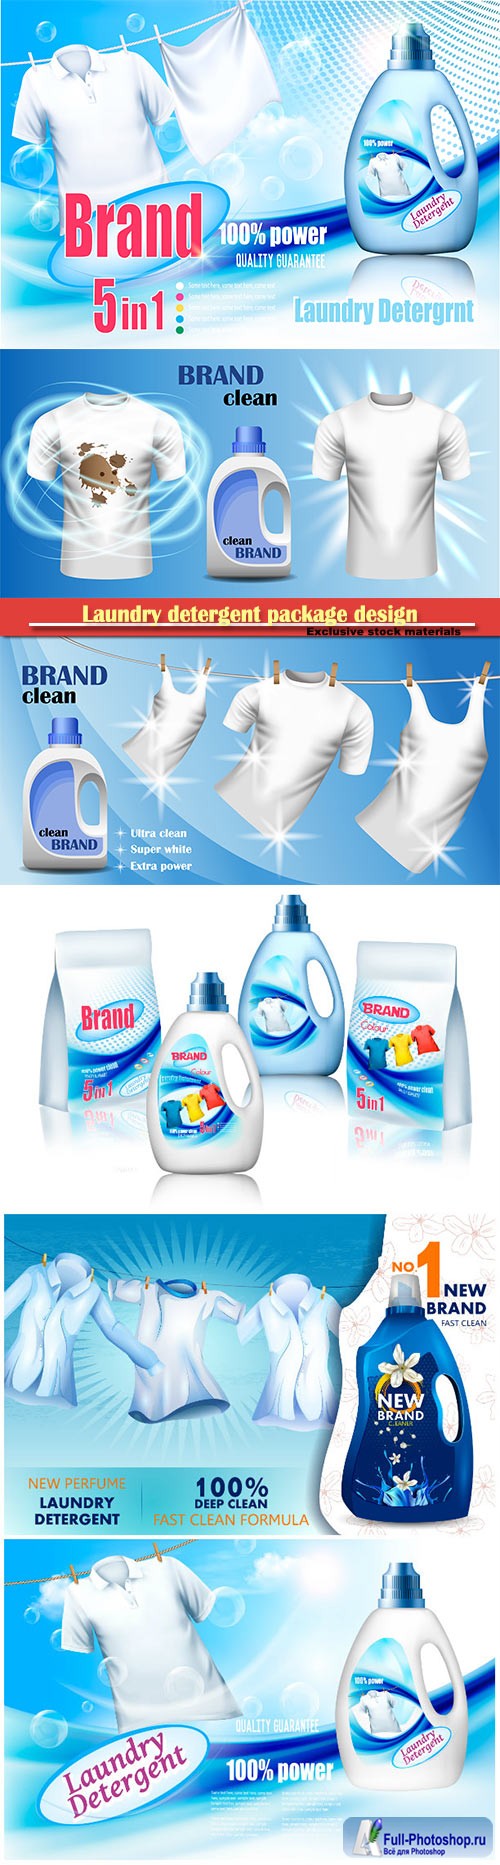 Laundry detergent package design, vector set of container bottles with label and bags